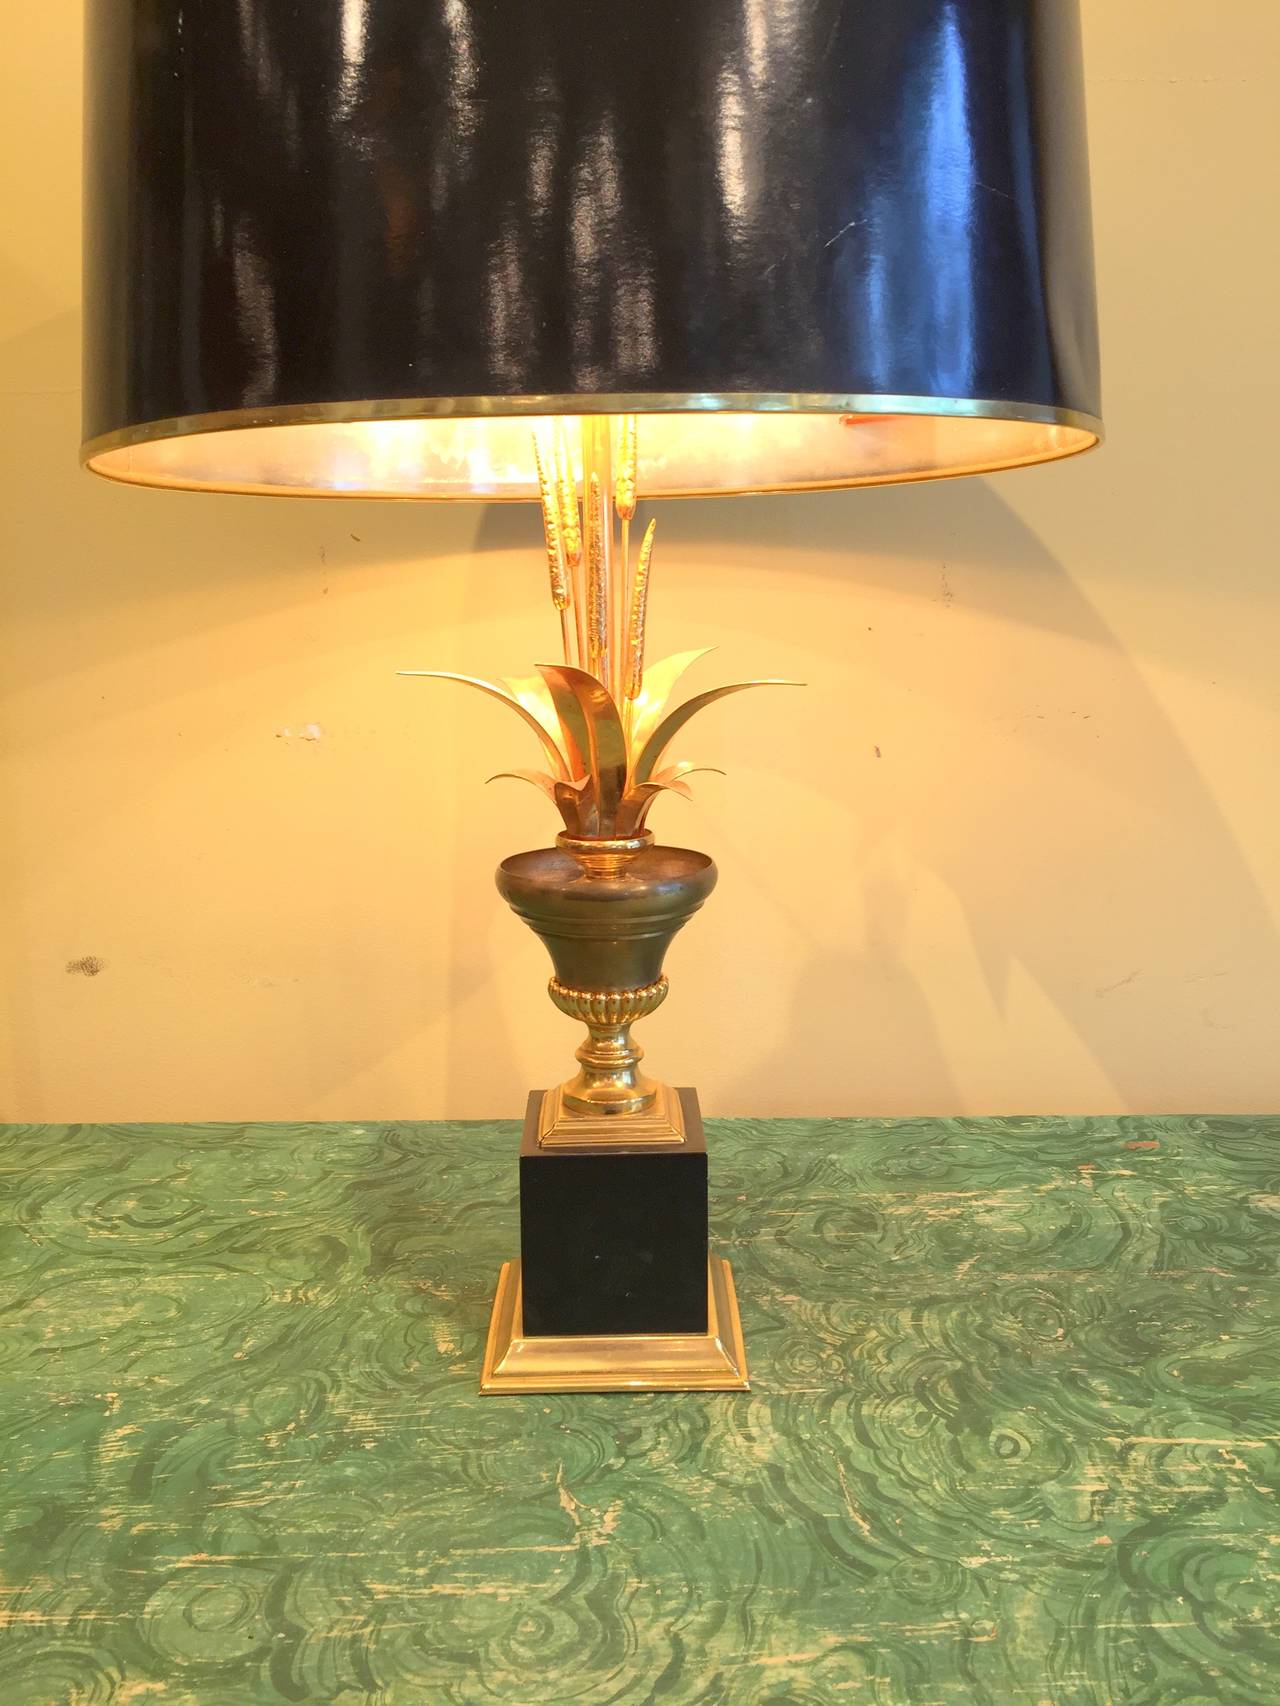 Vintage Maison Jansen French brass table lamp with black shade.
Shade is 16.50